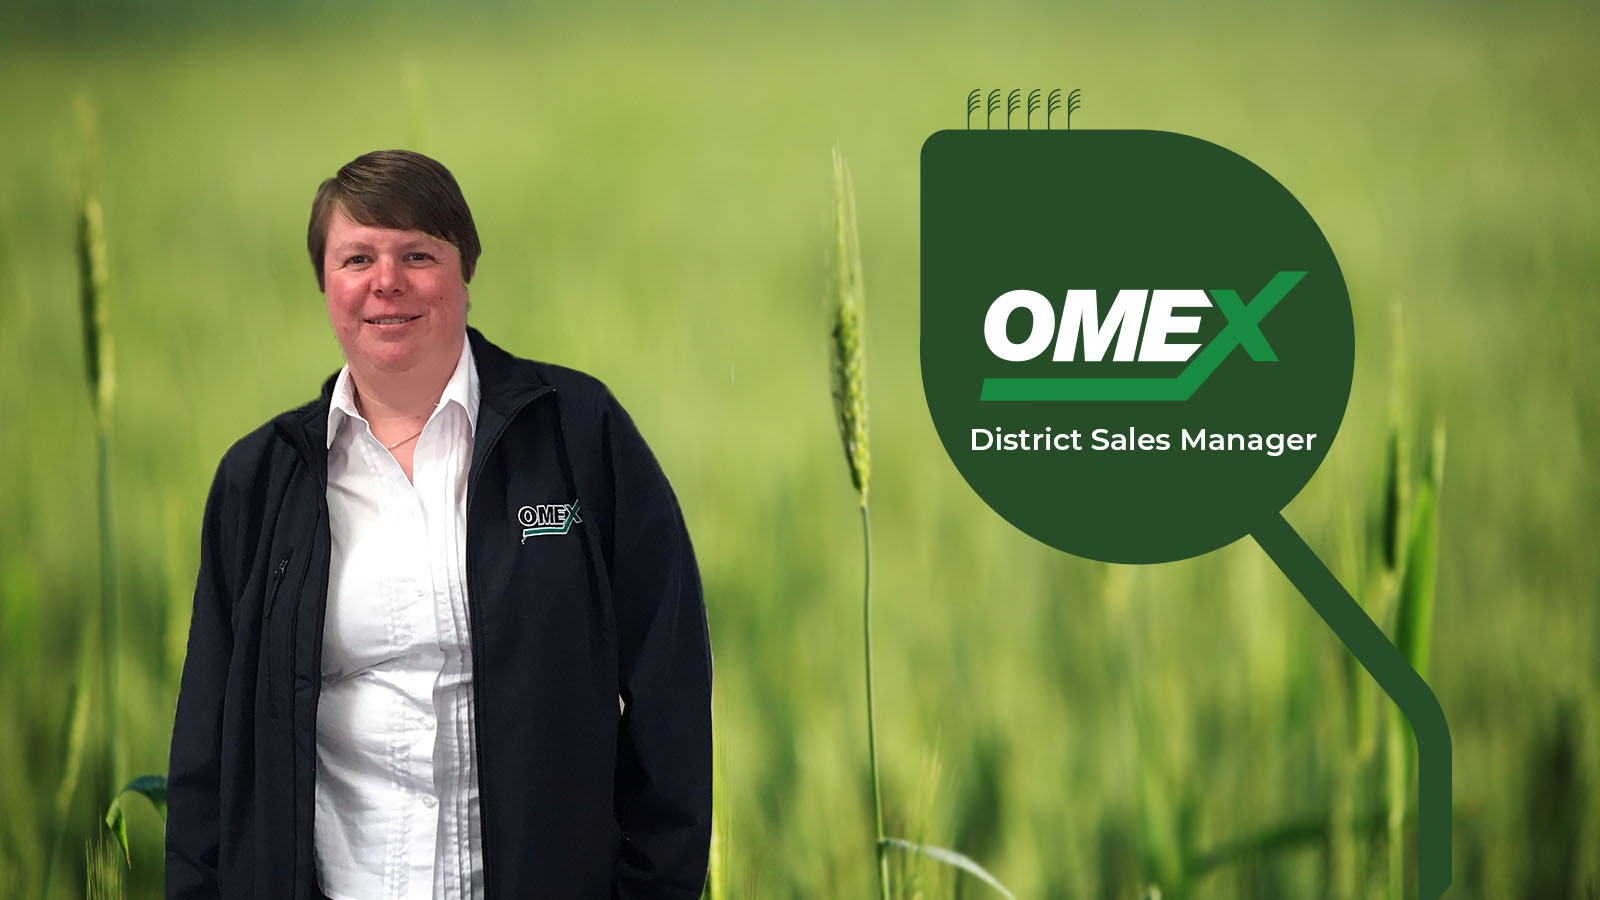 OMEX appoints new District Sales Manager